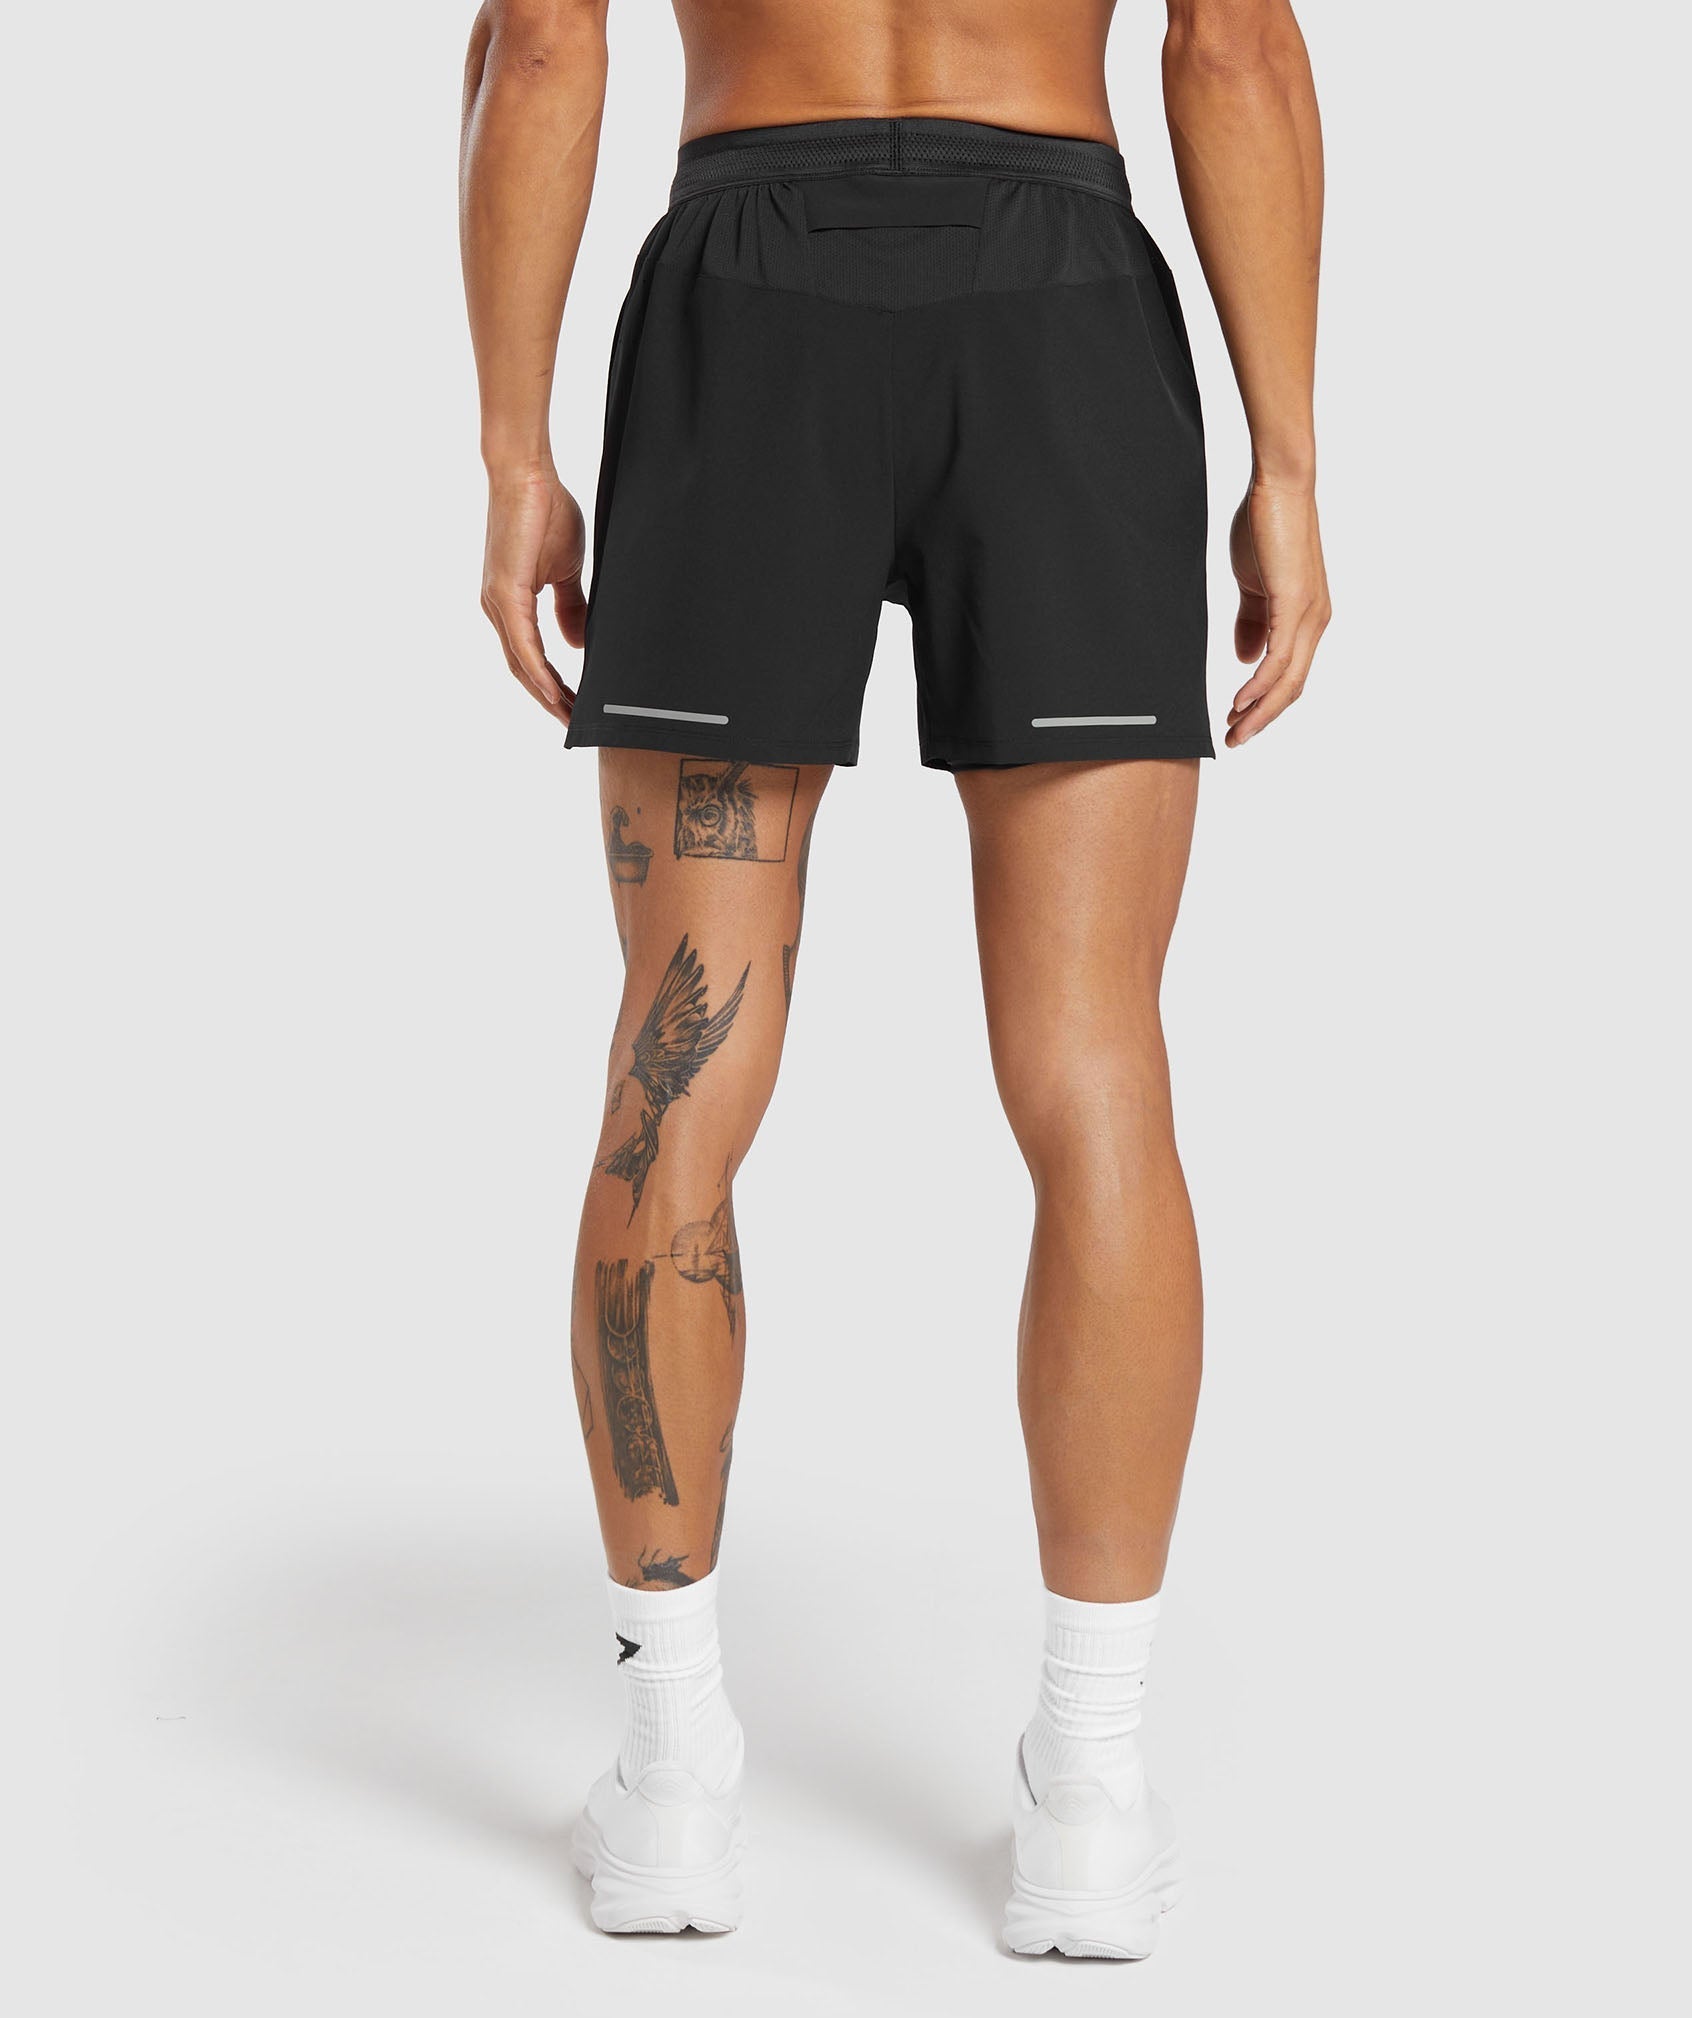 Speed 5" Shorts in Black - view 3